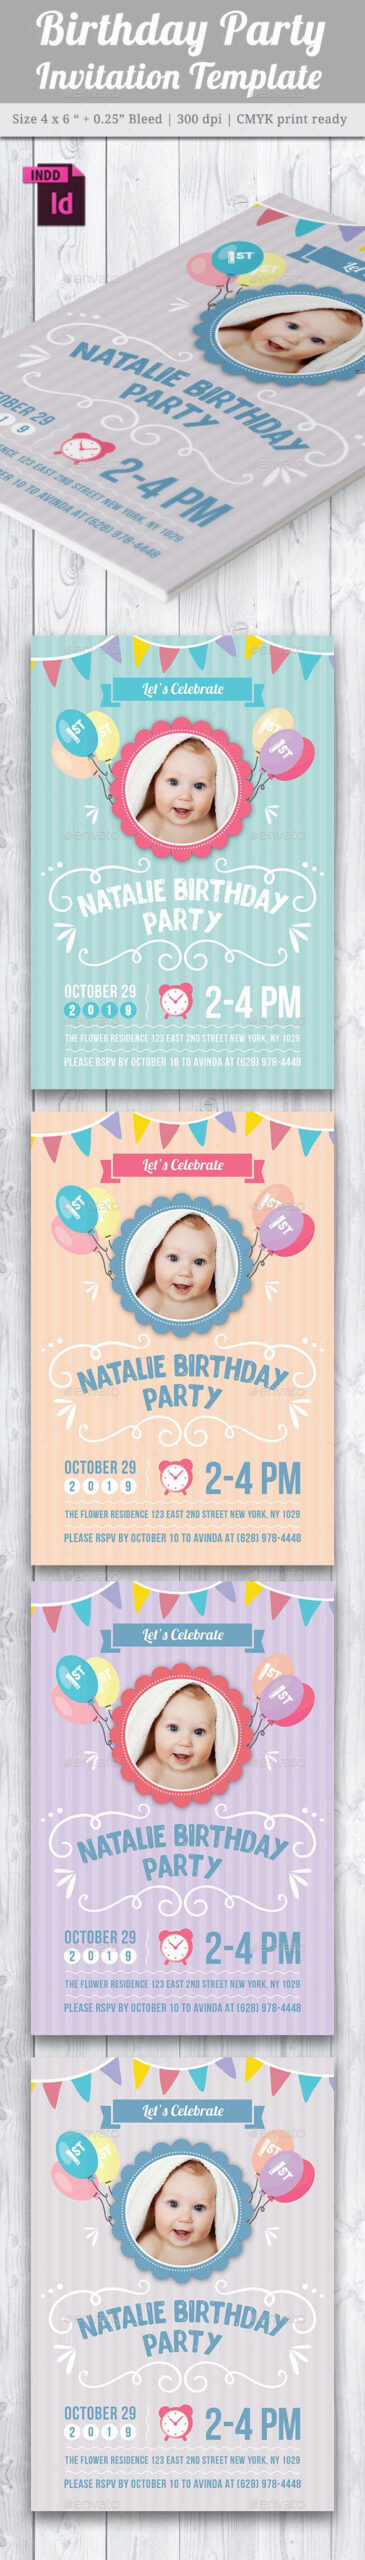 Baby Birthday Card Design Template Indesign Indd | Card Throughout Birthday Card Template Indesign